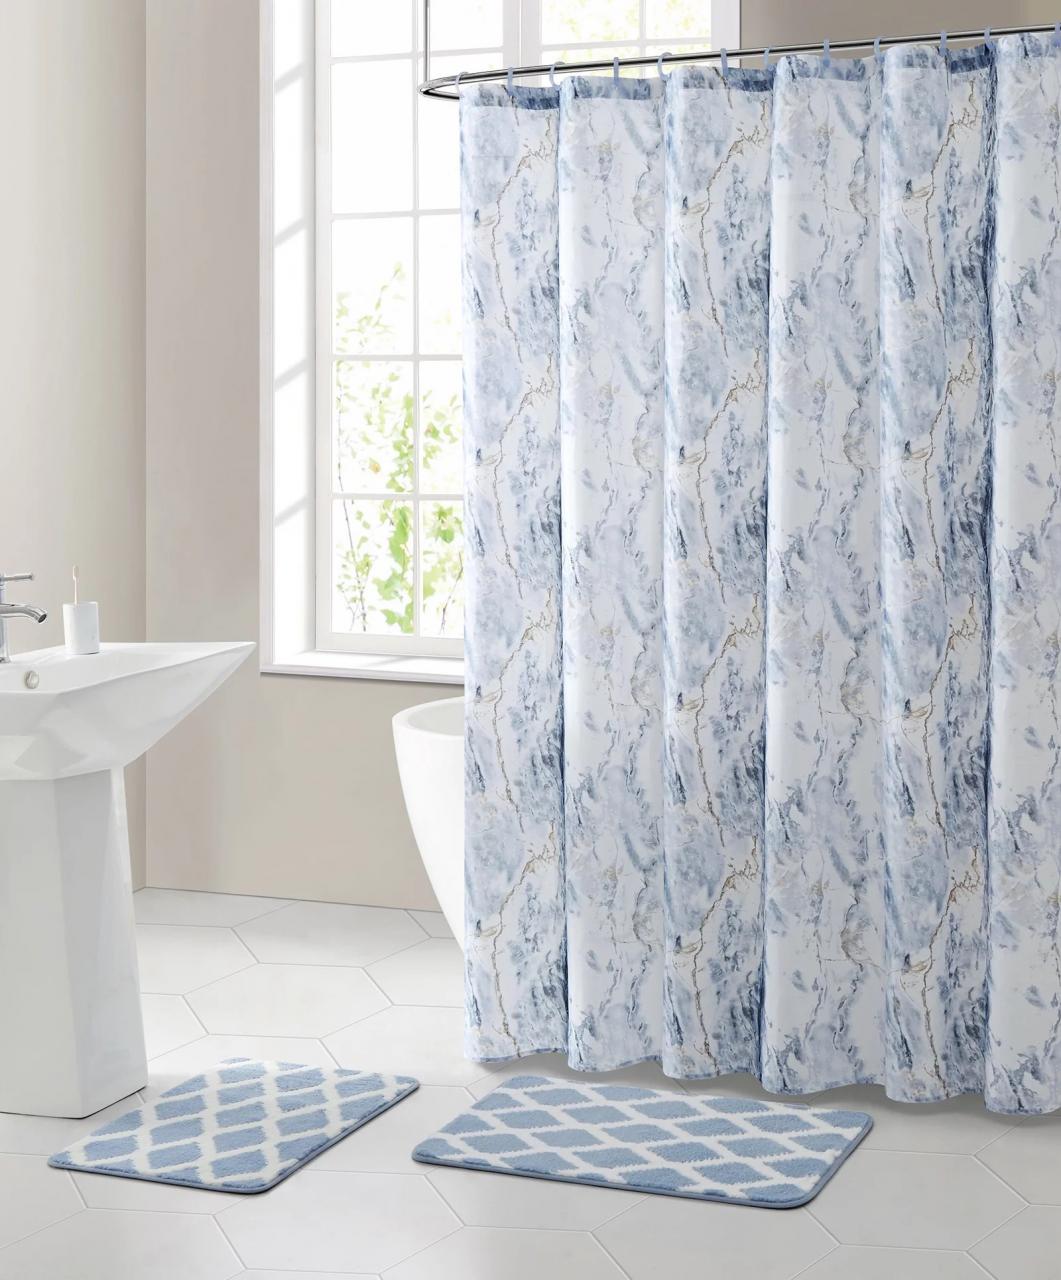 Blue Marble Polyester Shower Curtain Bath Set,15 Pieces, Mainstays